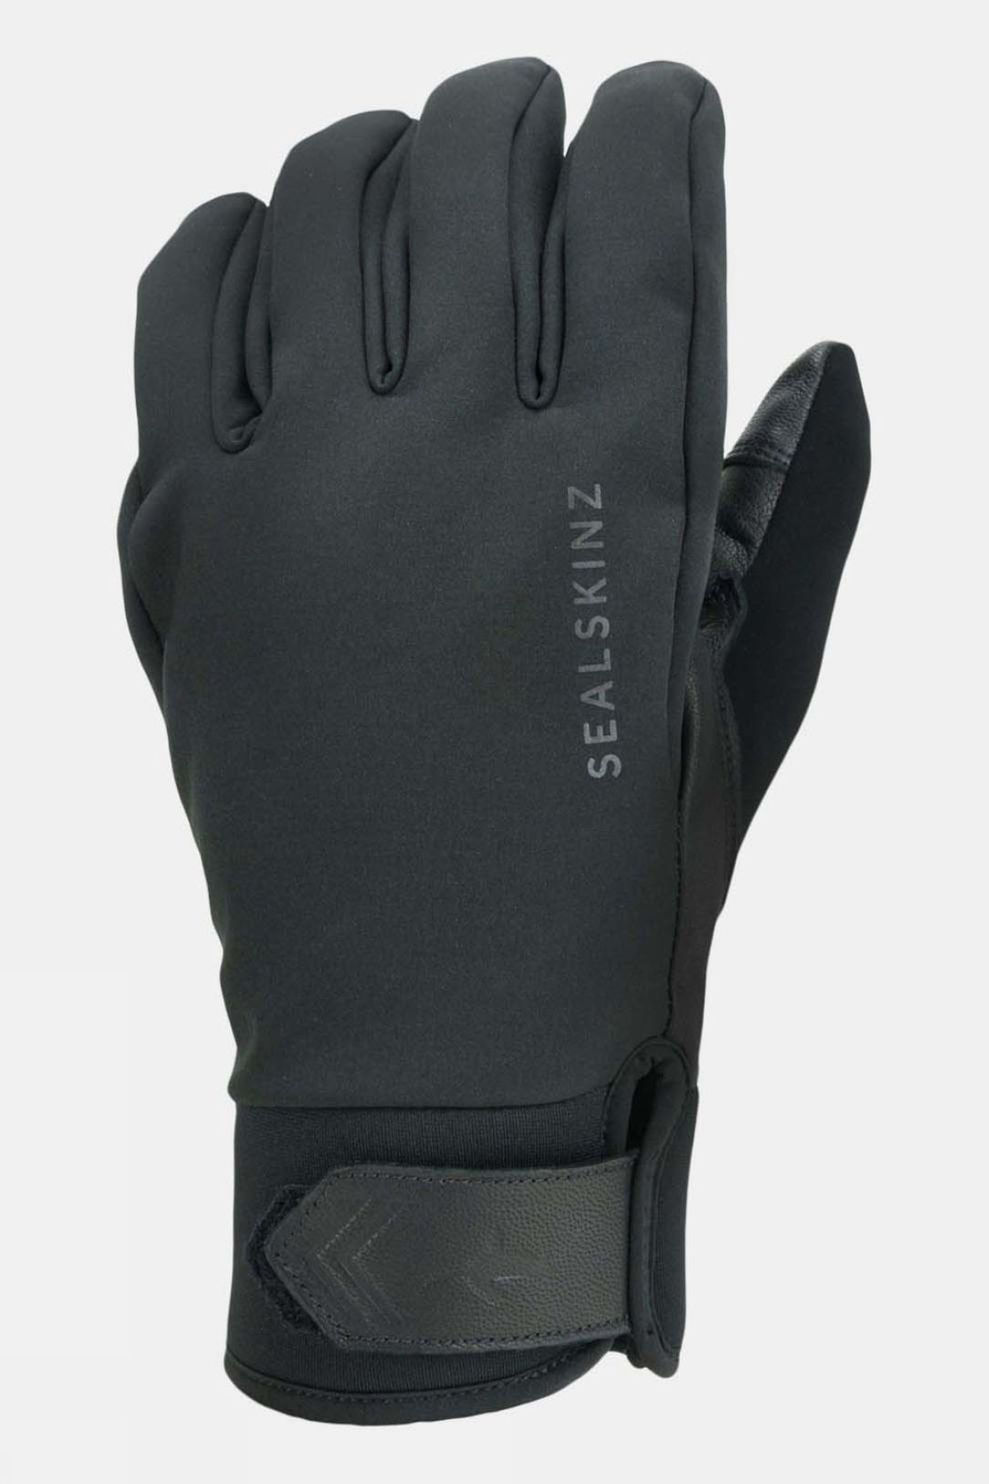 SealSkinz Mens Waterproof All Weather Insulated Glove